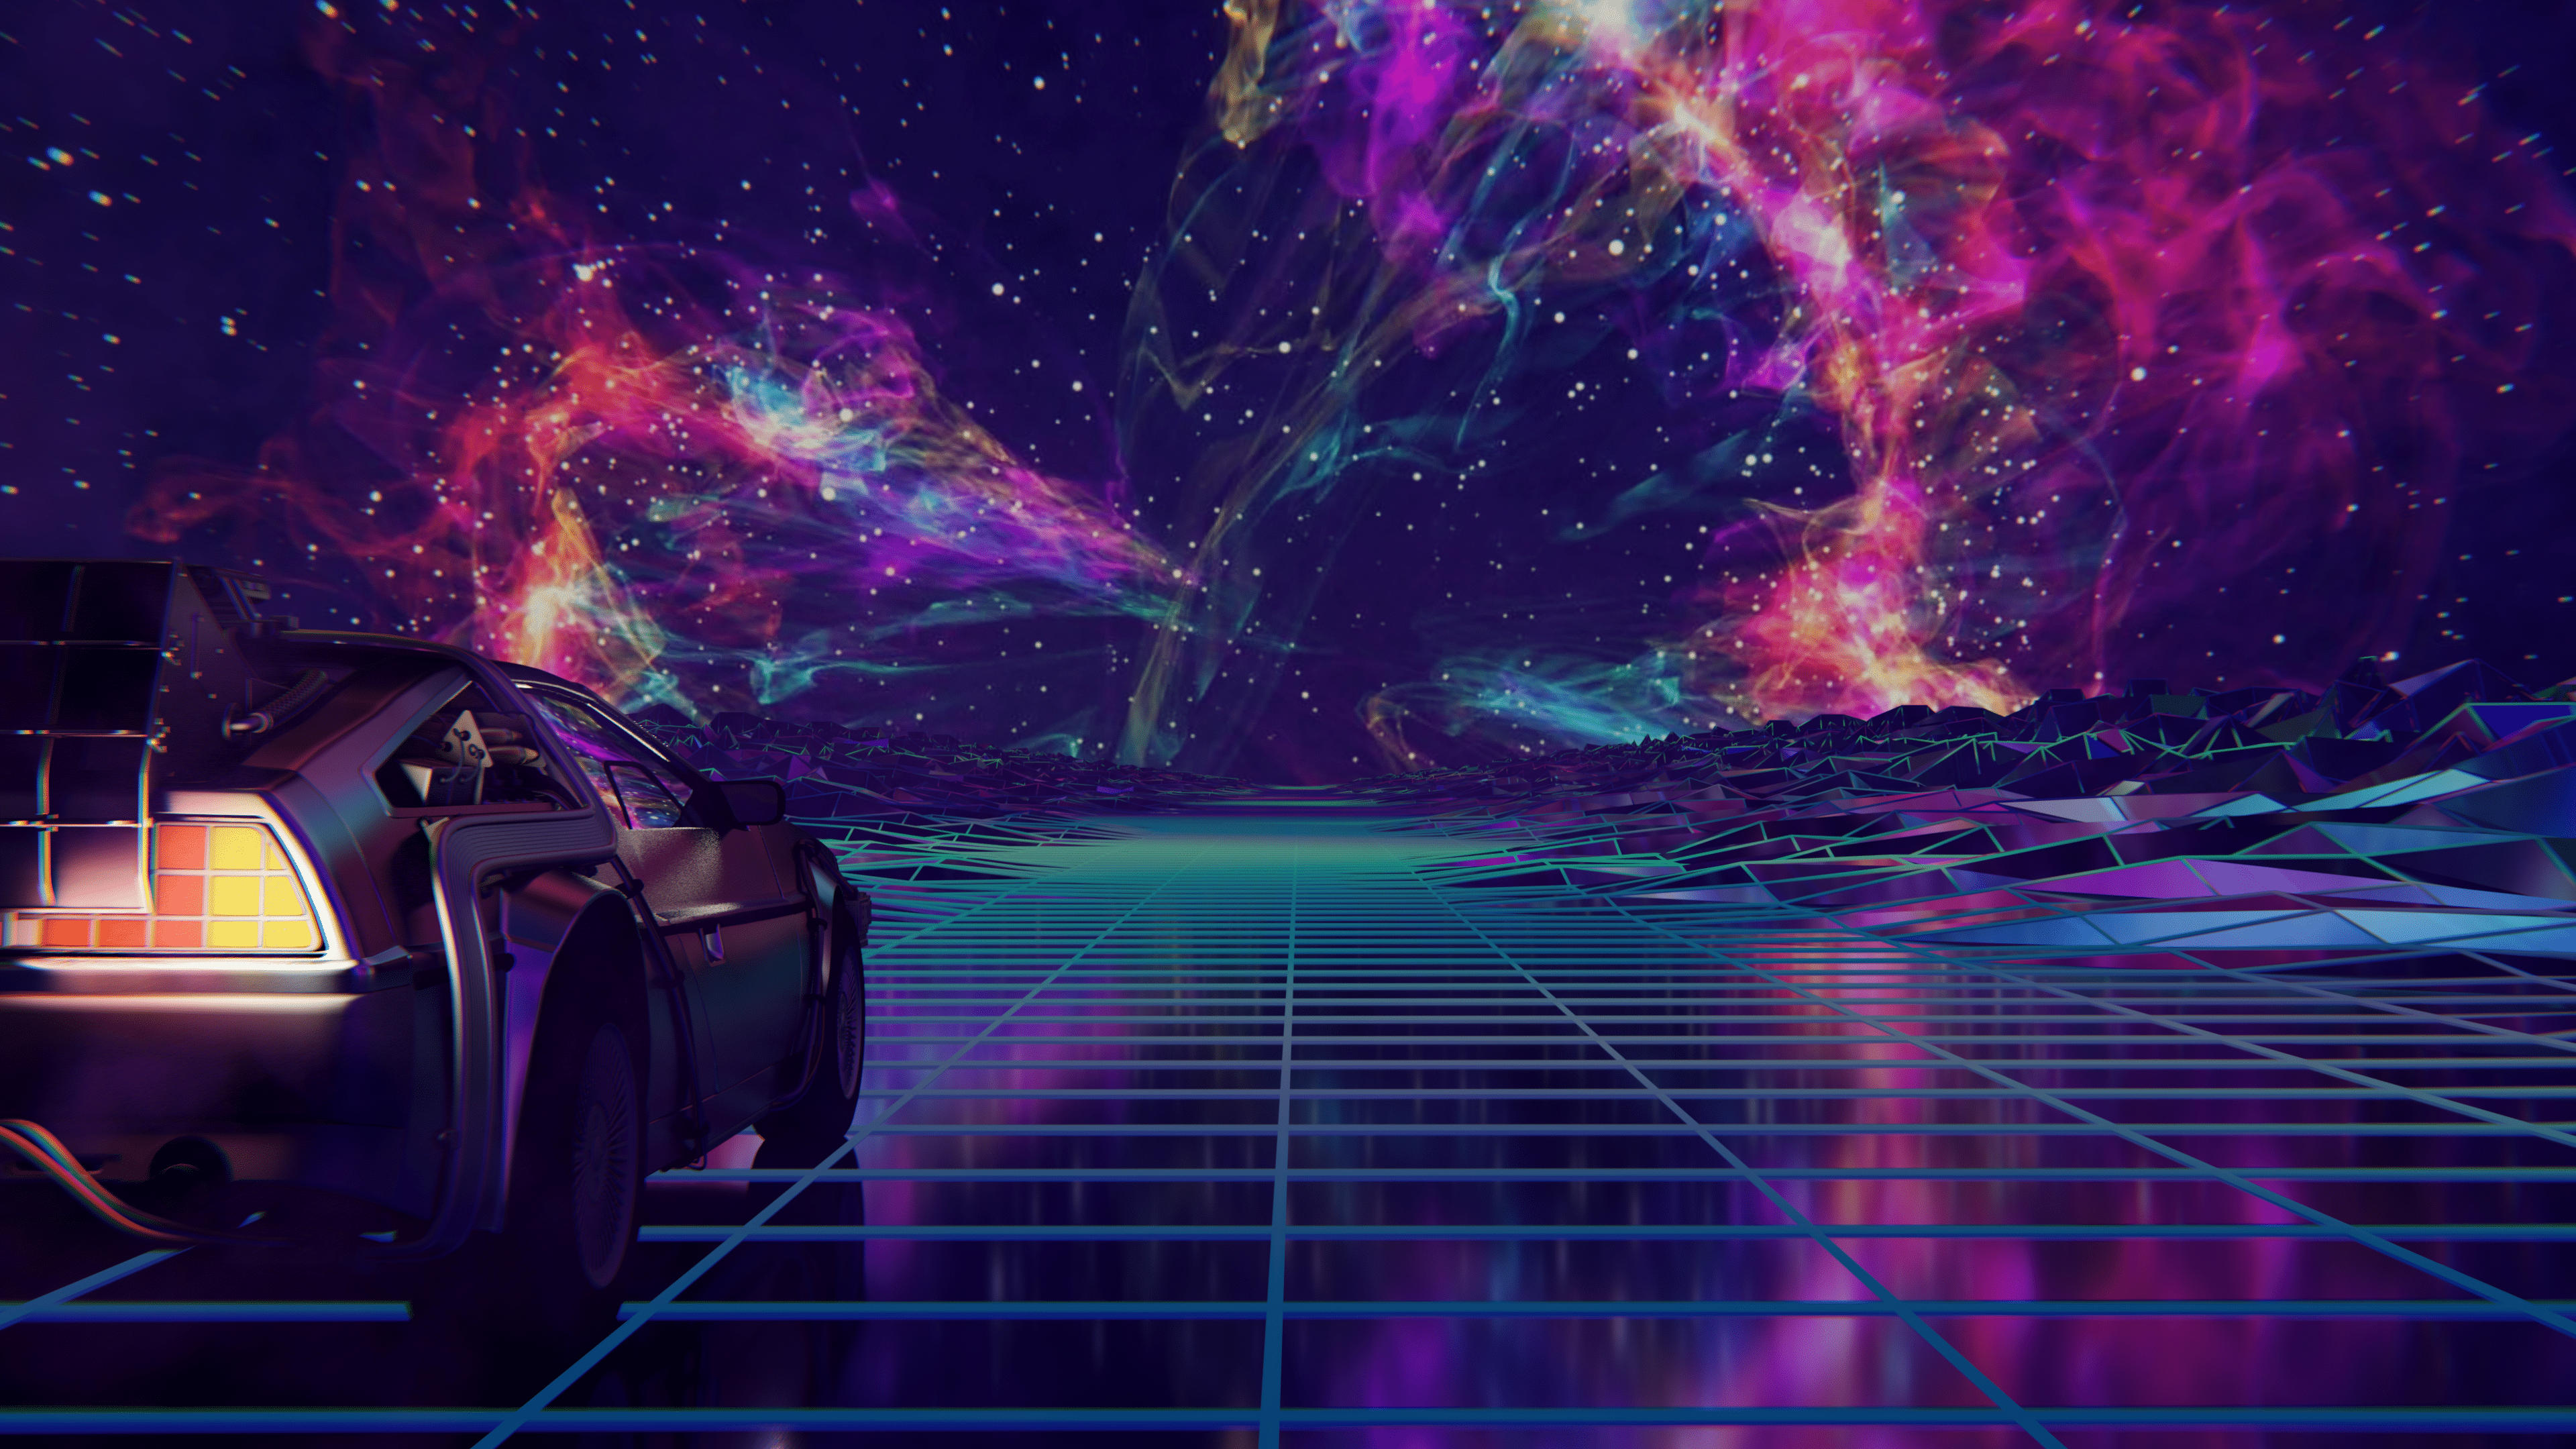 Back to the future car in a futuristic galaxy - Synthwave